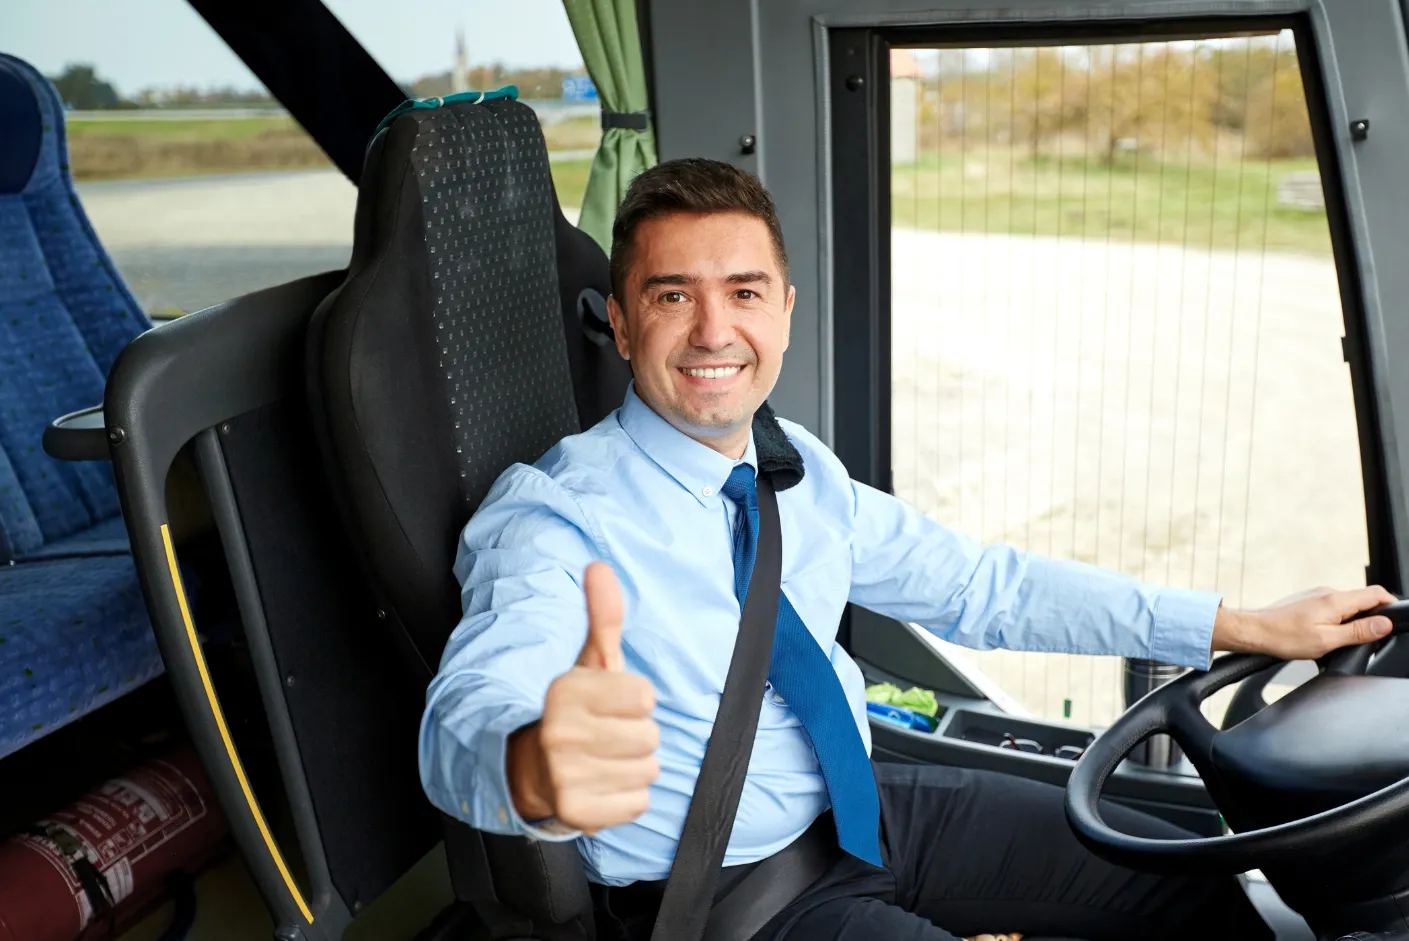 Here is Study guide of dmv cdl test of USA country